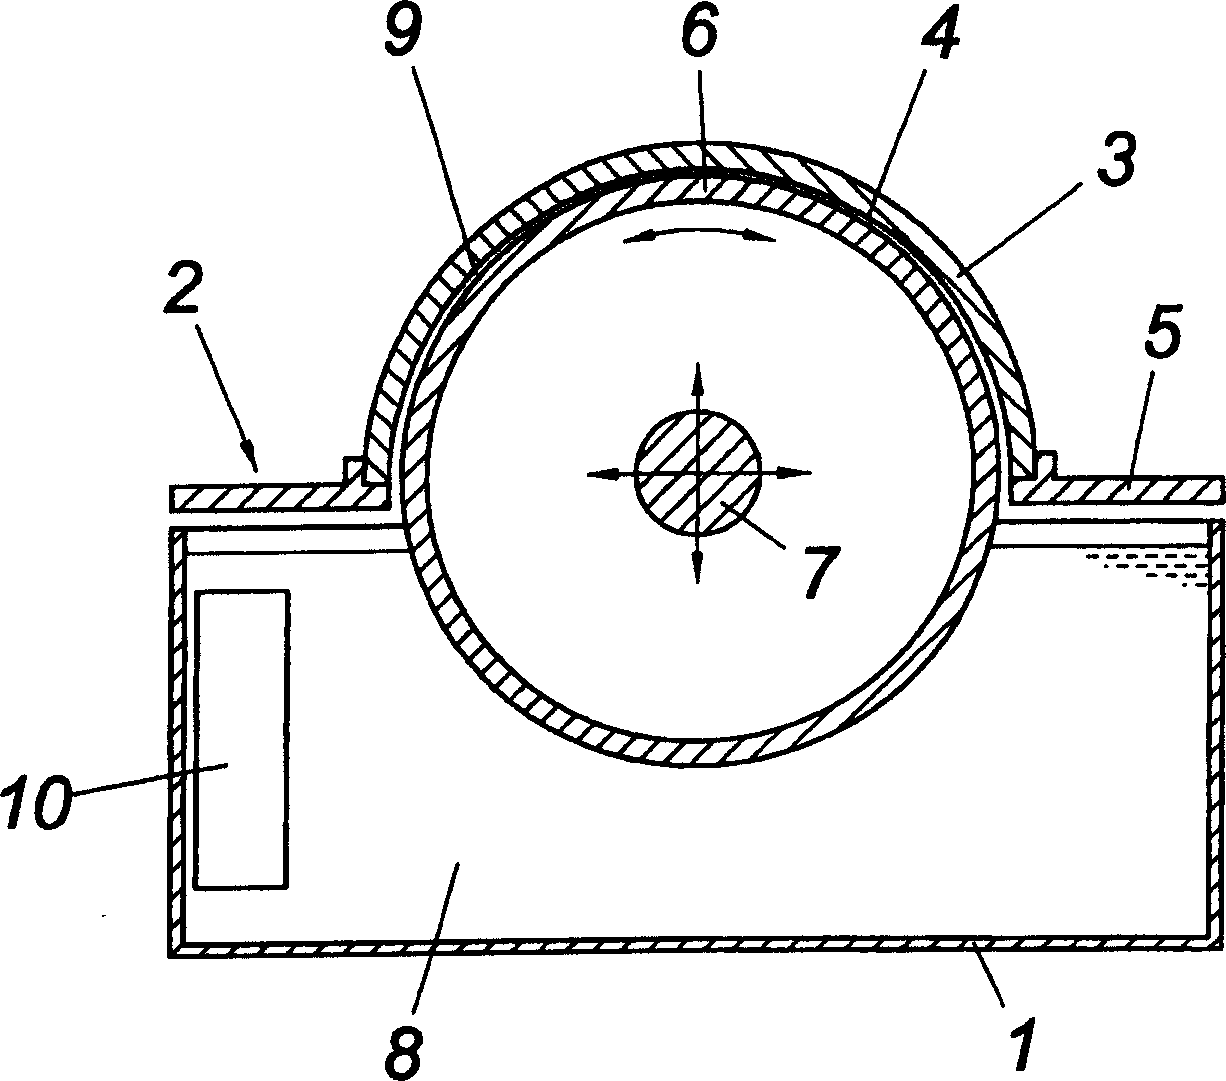 Method for electroplating a cylindrical inside surface of a work-piece-extending substantially over a semi-circle